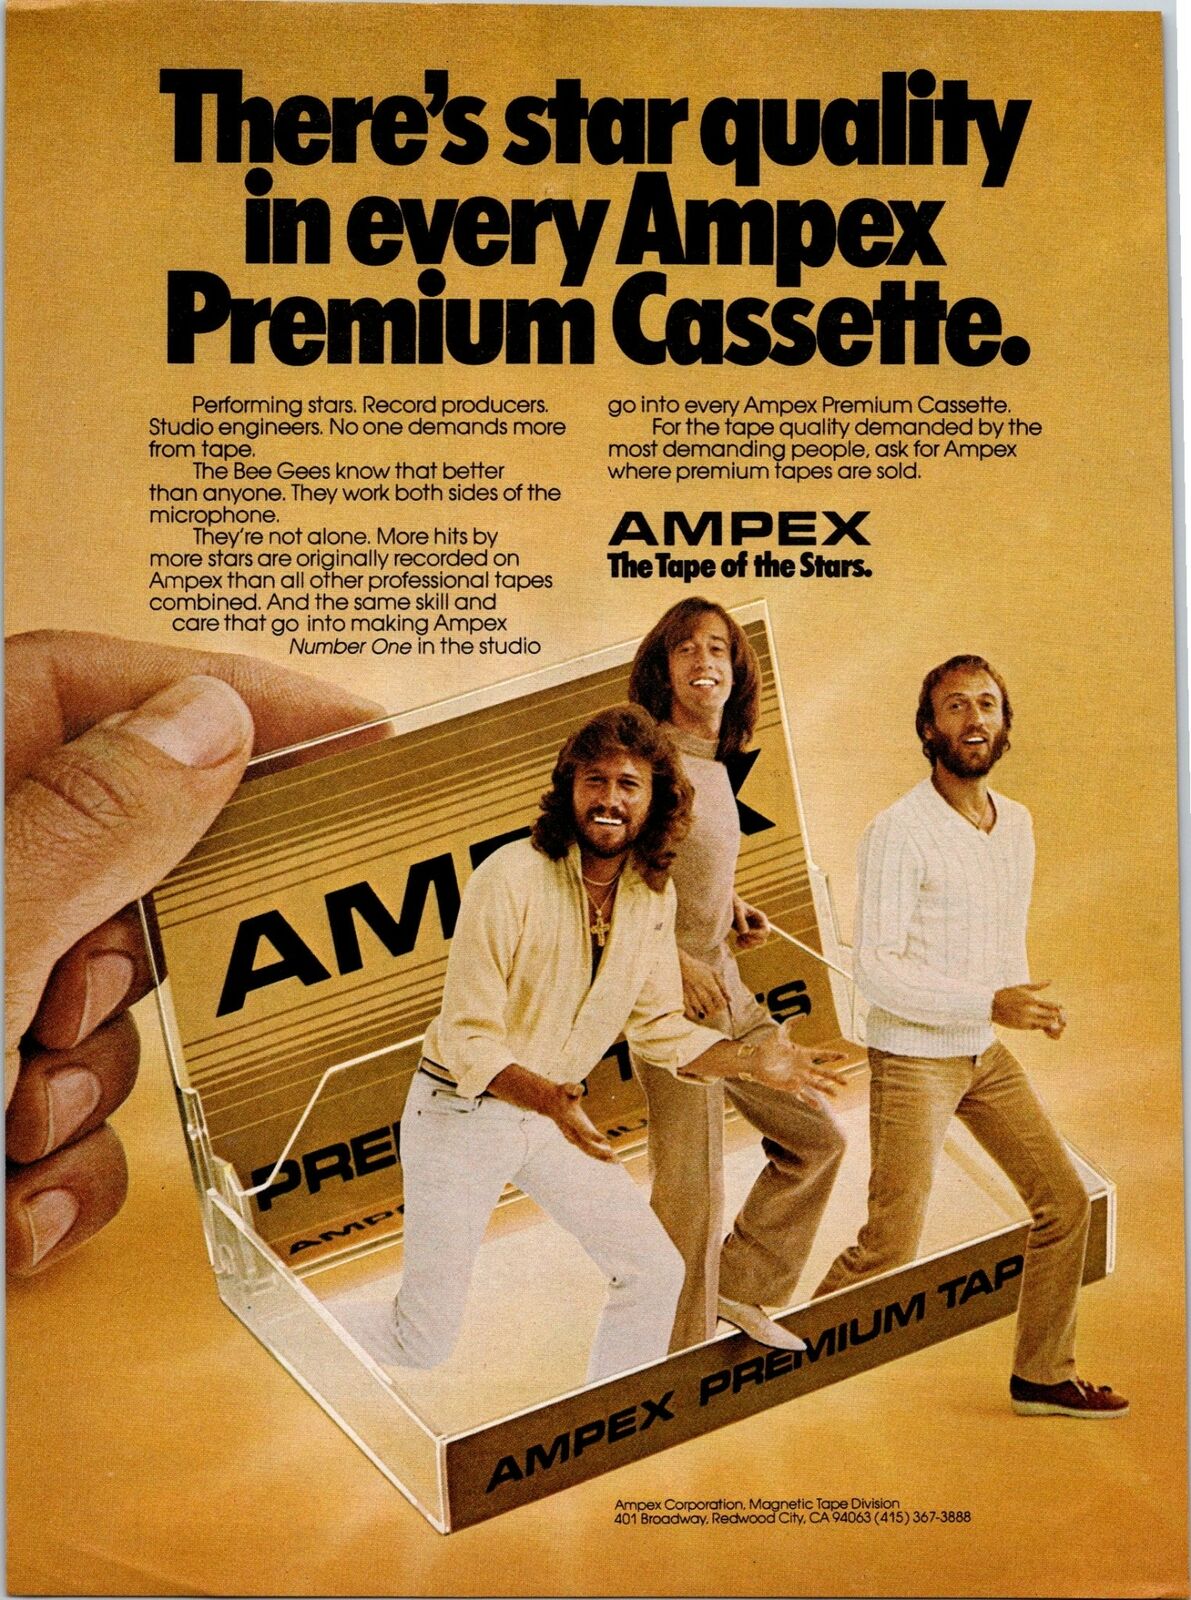 1981 Vintage 8x11 Print Ad For Ampex Premium Tapes/cassettes With The Bee Gees